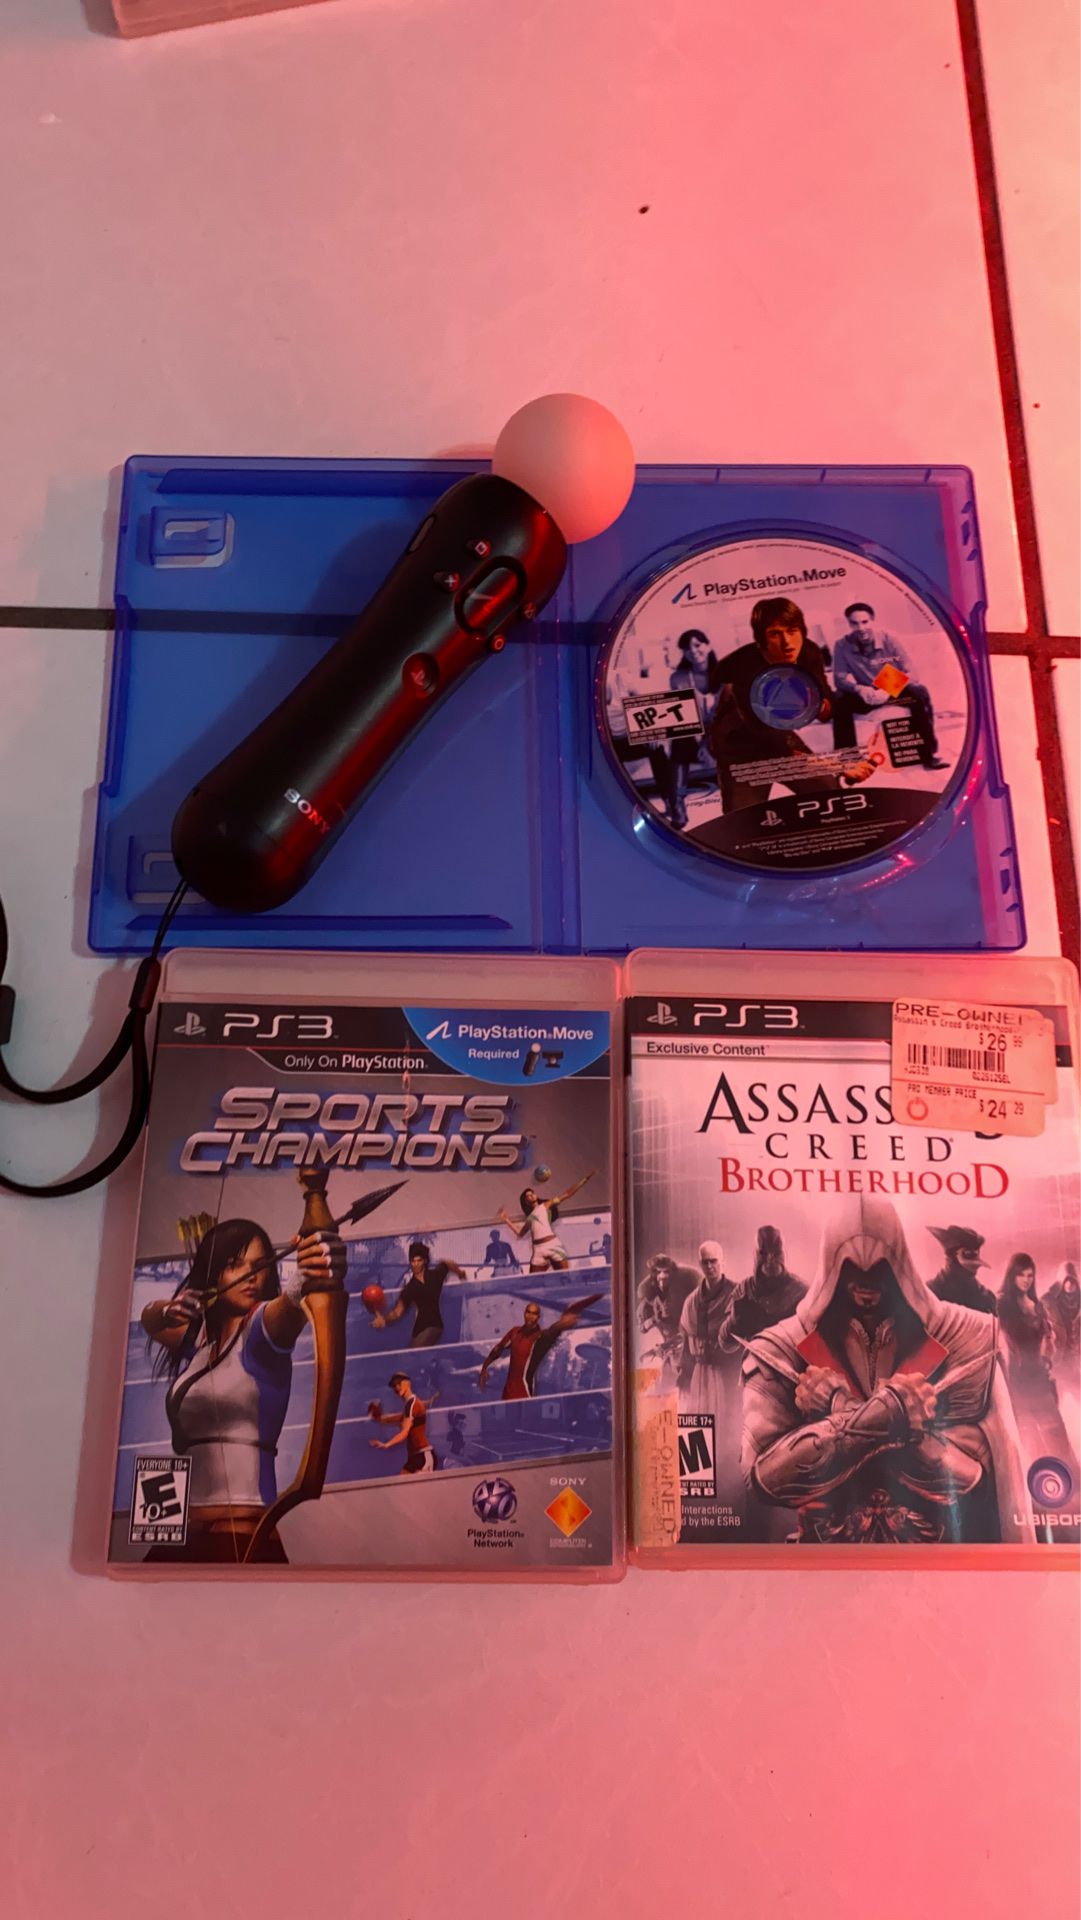 PS3 move stick and game, and another ps3 game